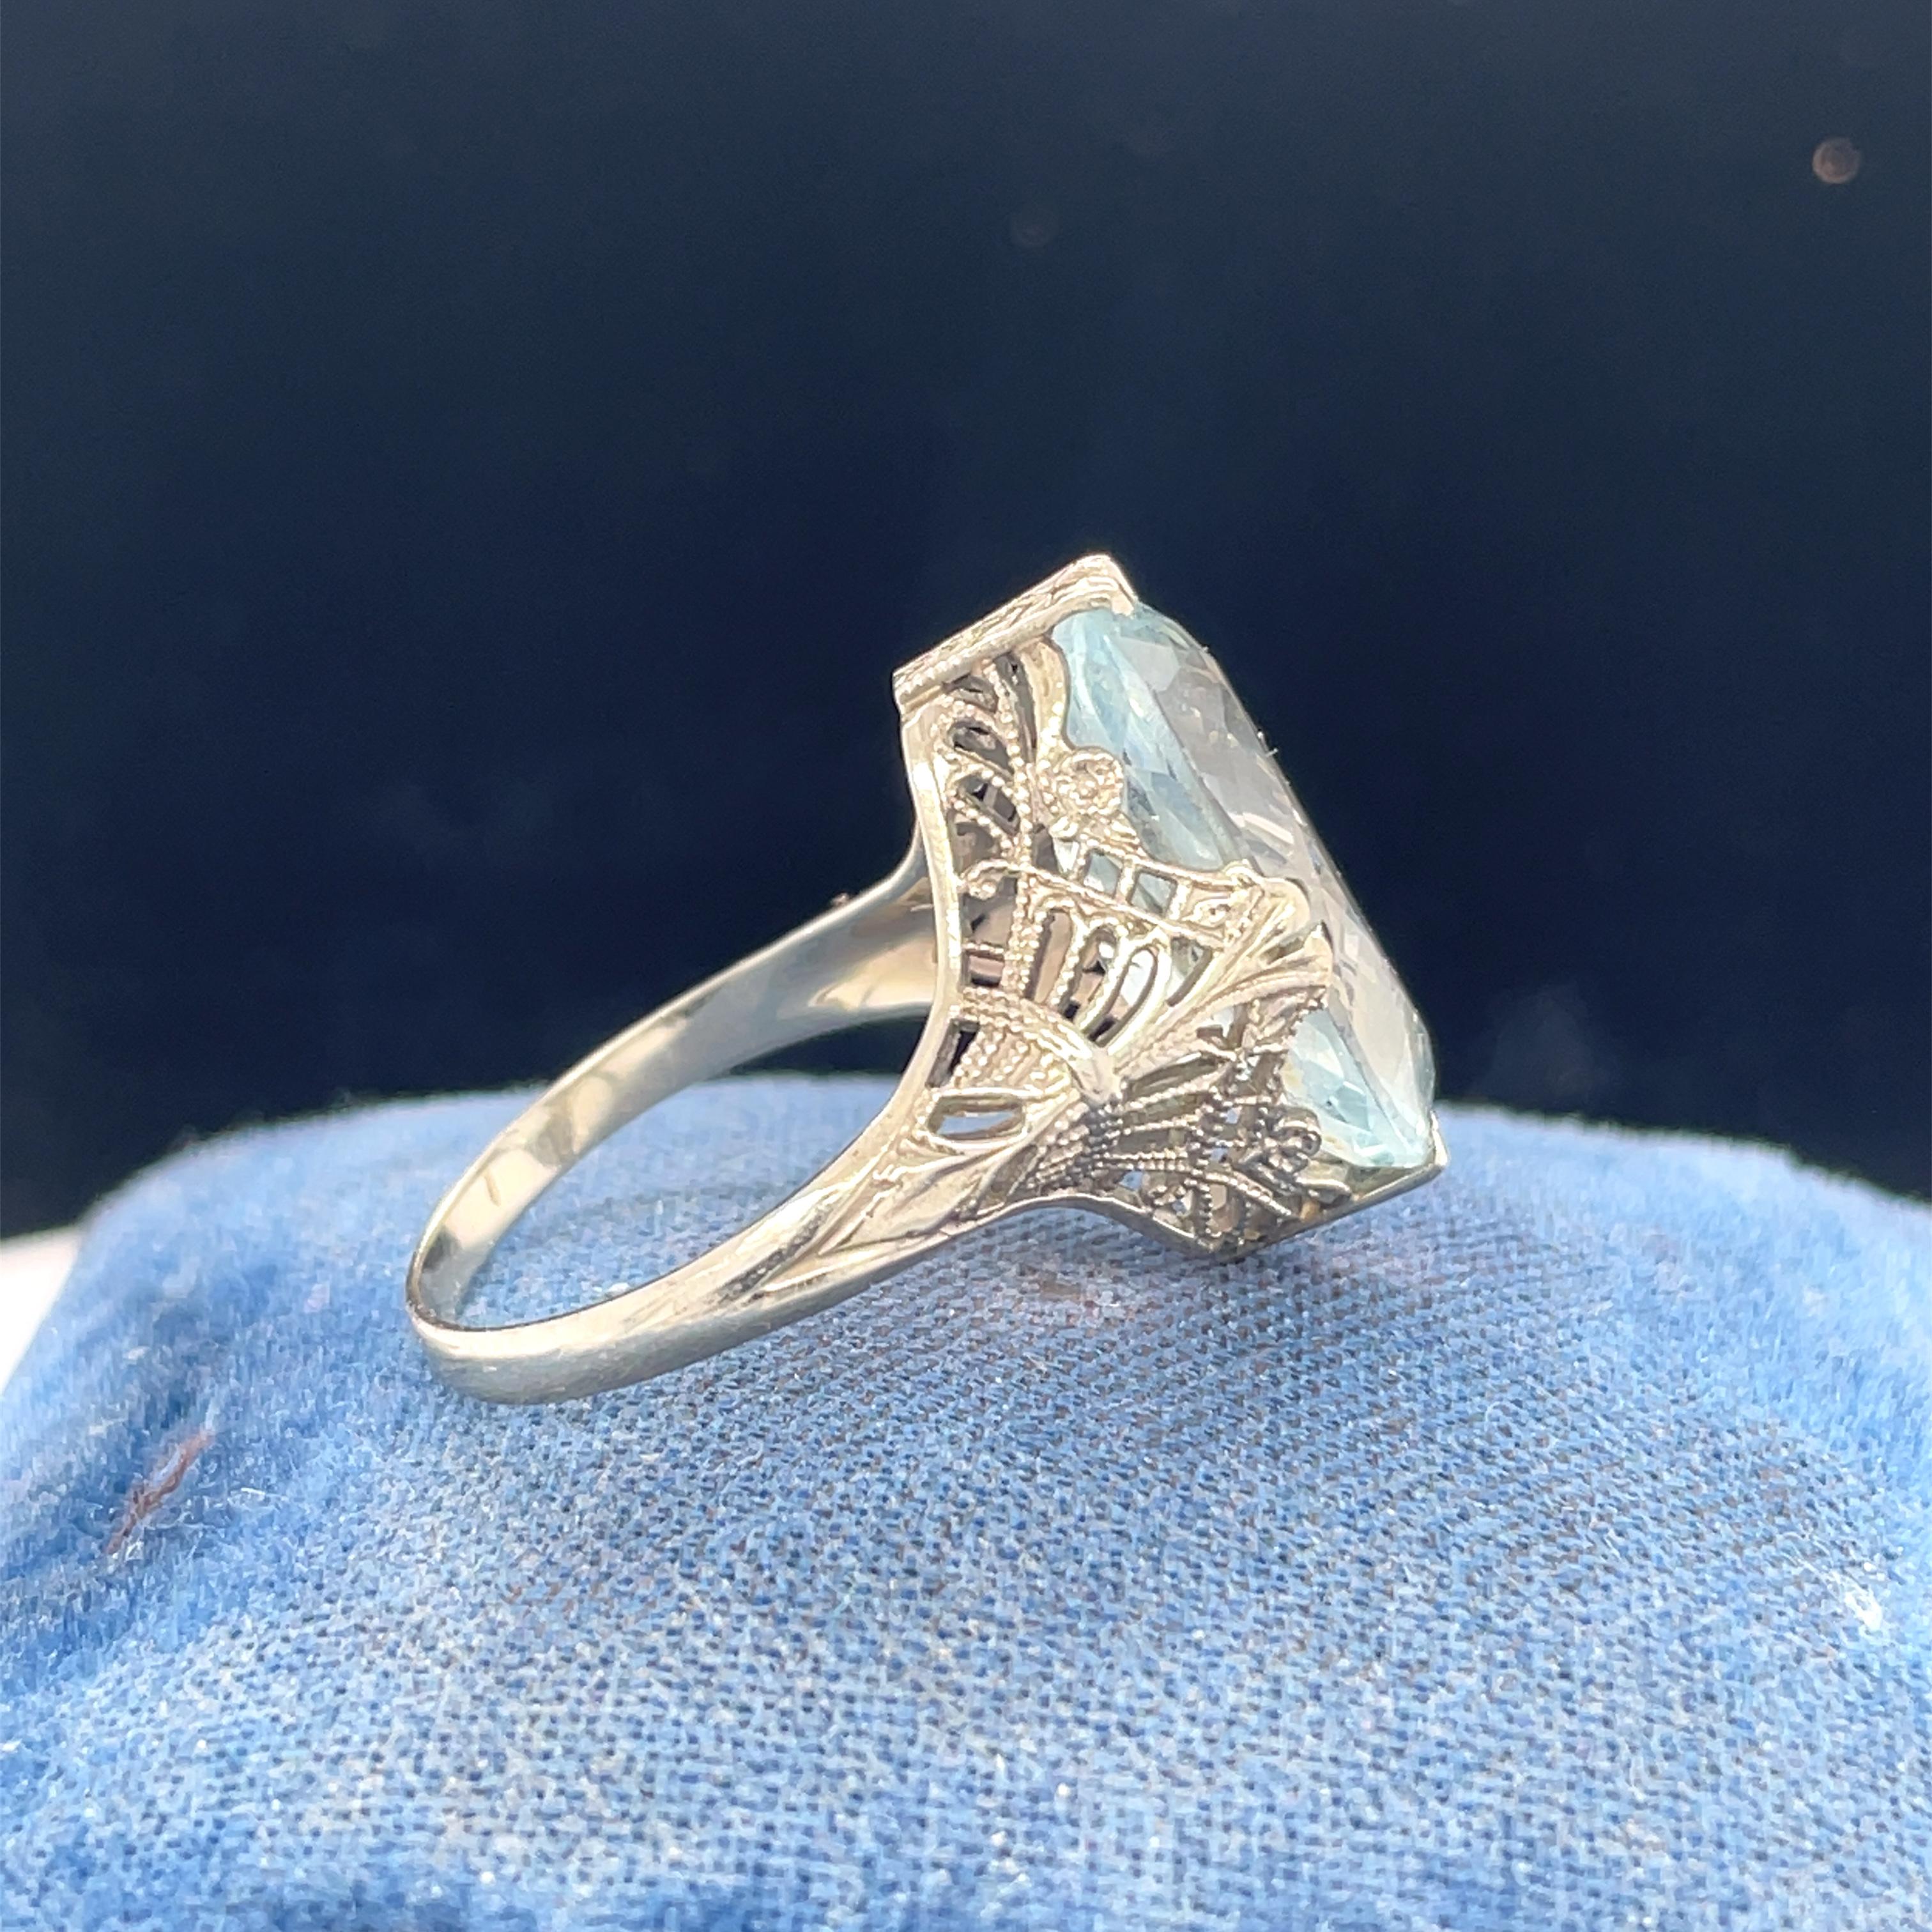 Item Details:
Ring Size: 5.25
Metal Type: 14k White Gold [Hallmarked, and Tested]
Weight: 2.6 grams

Aquamarine Details:
Weight: 4.00ct, total weight
Cut: Oval Mixed Vintage Cut
Color: Blue
Clarity: VS

Finger to Top of Stone Measurement: